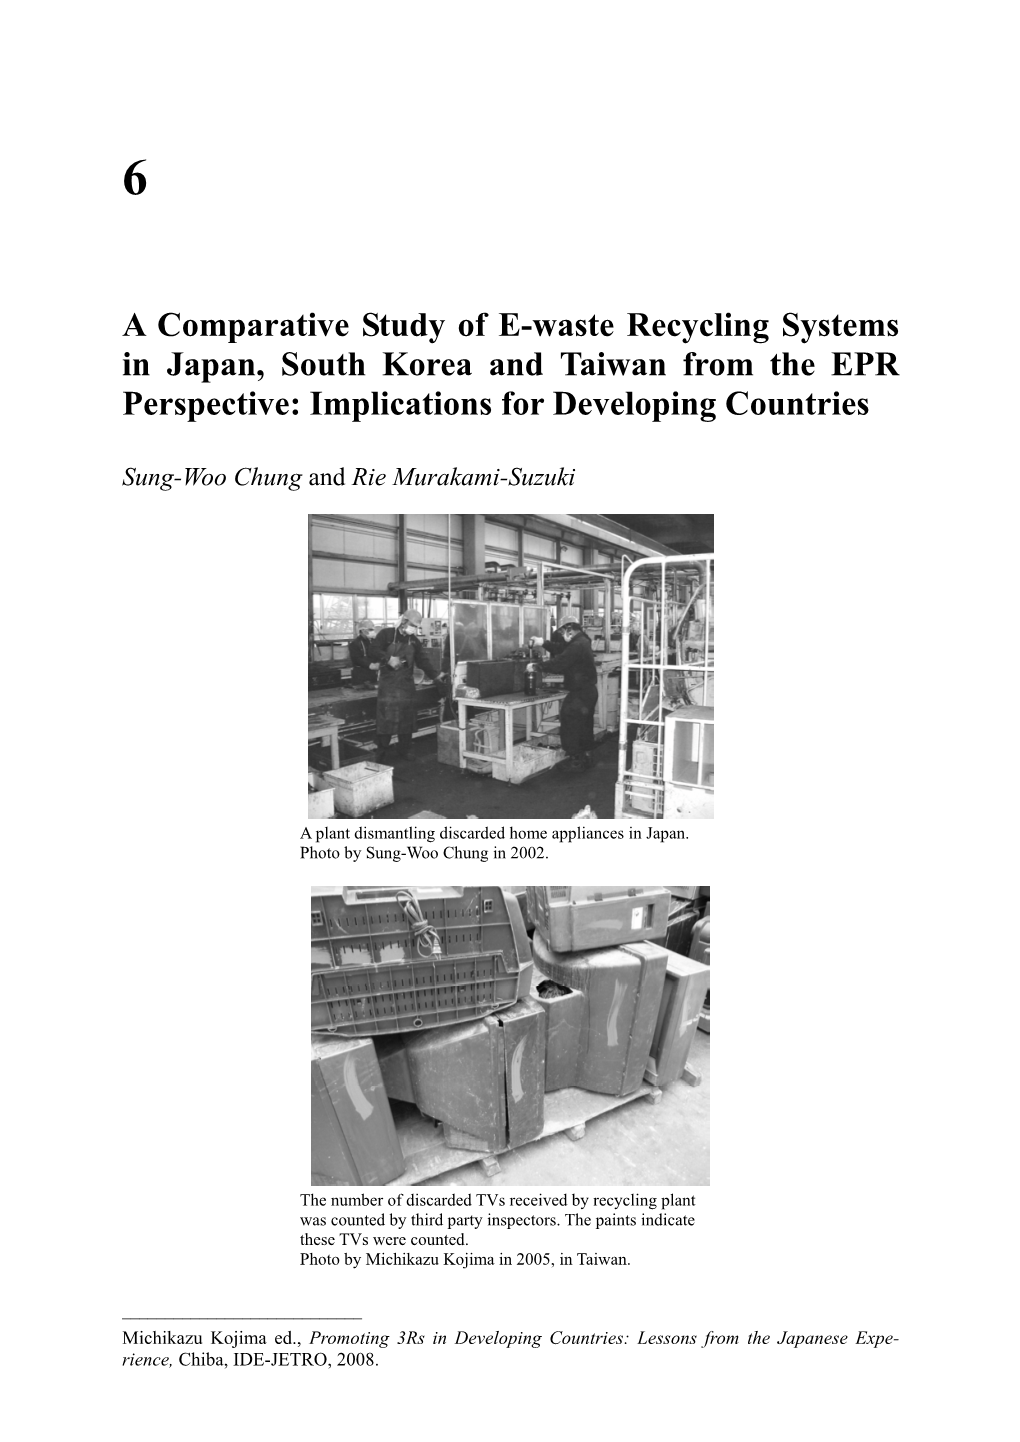 A Comparative Study of E-Waste Recycling Systems in Japan, South Korea and Taiwan from the EPR Perspective: Implications for Developing Countries